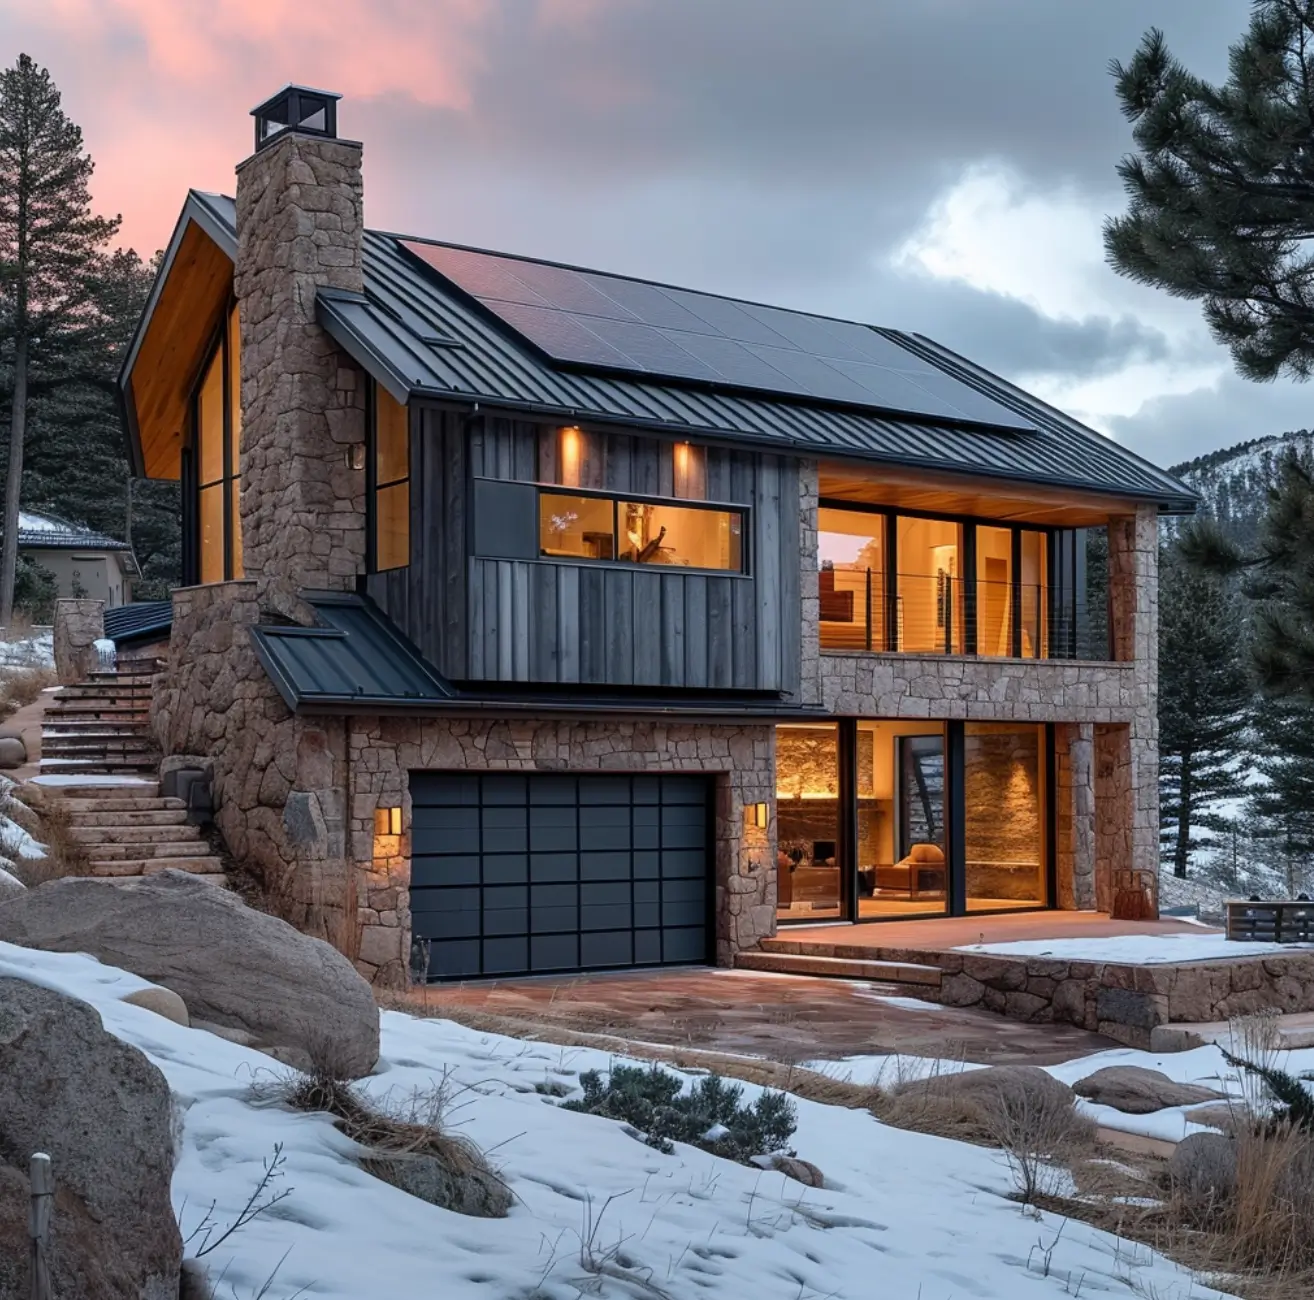 House with rocky outside, on a snowy mountain, with solar panels on the roof, modern looking house with chimney, 2 floors, and open windows on one side. Solar power vs electricity